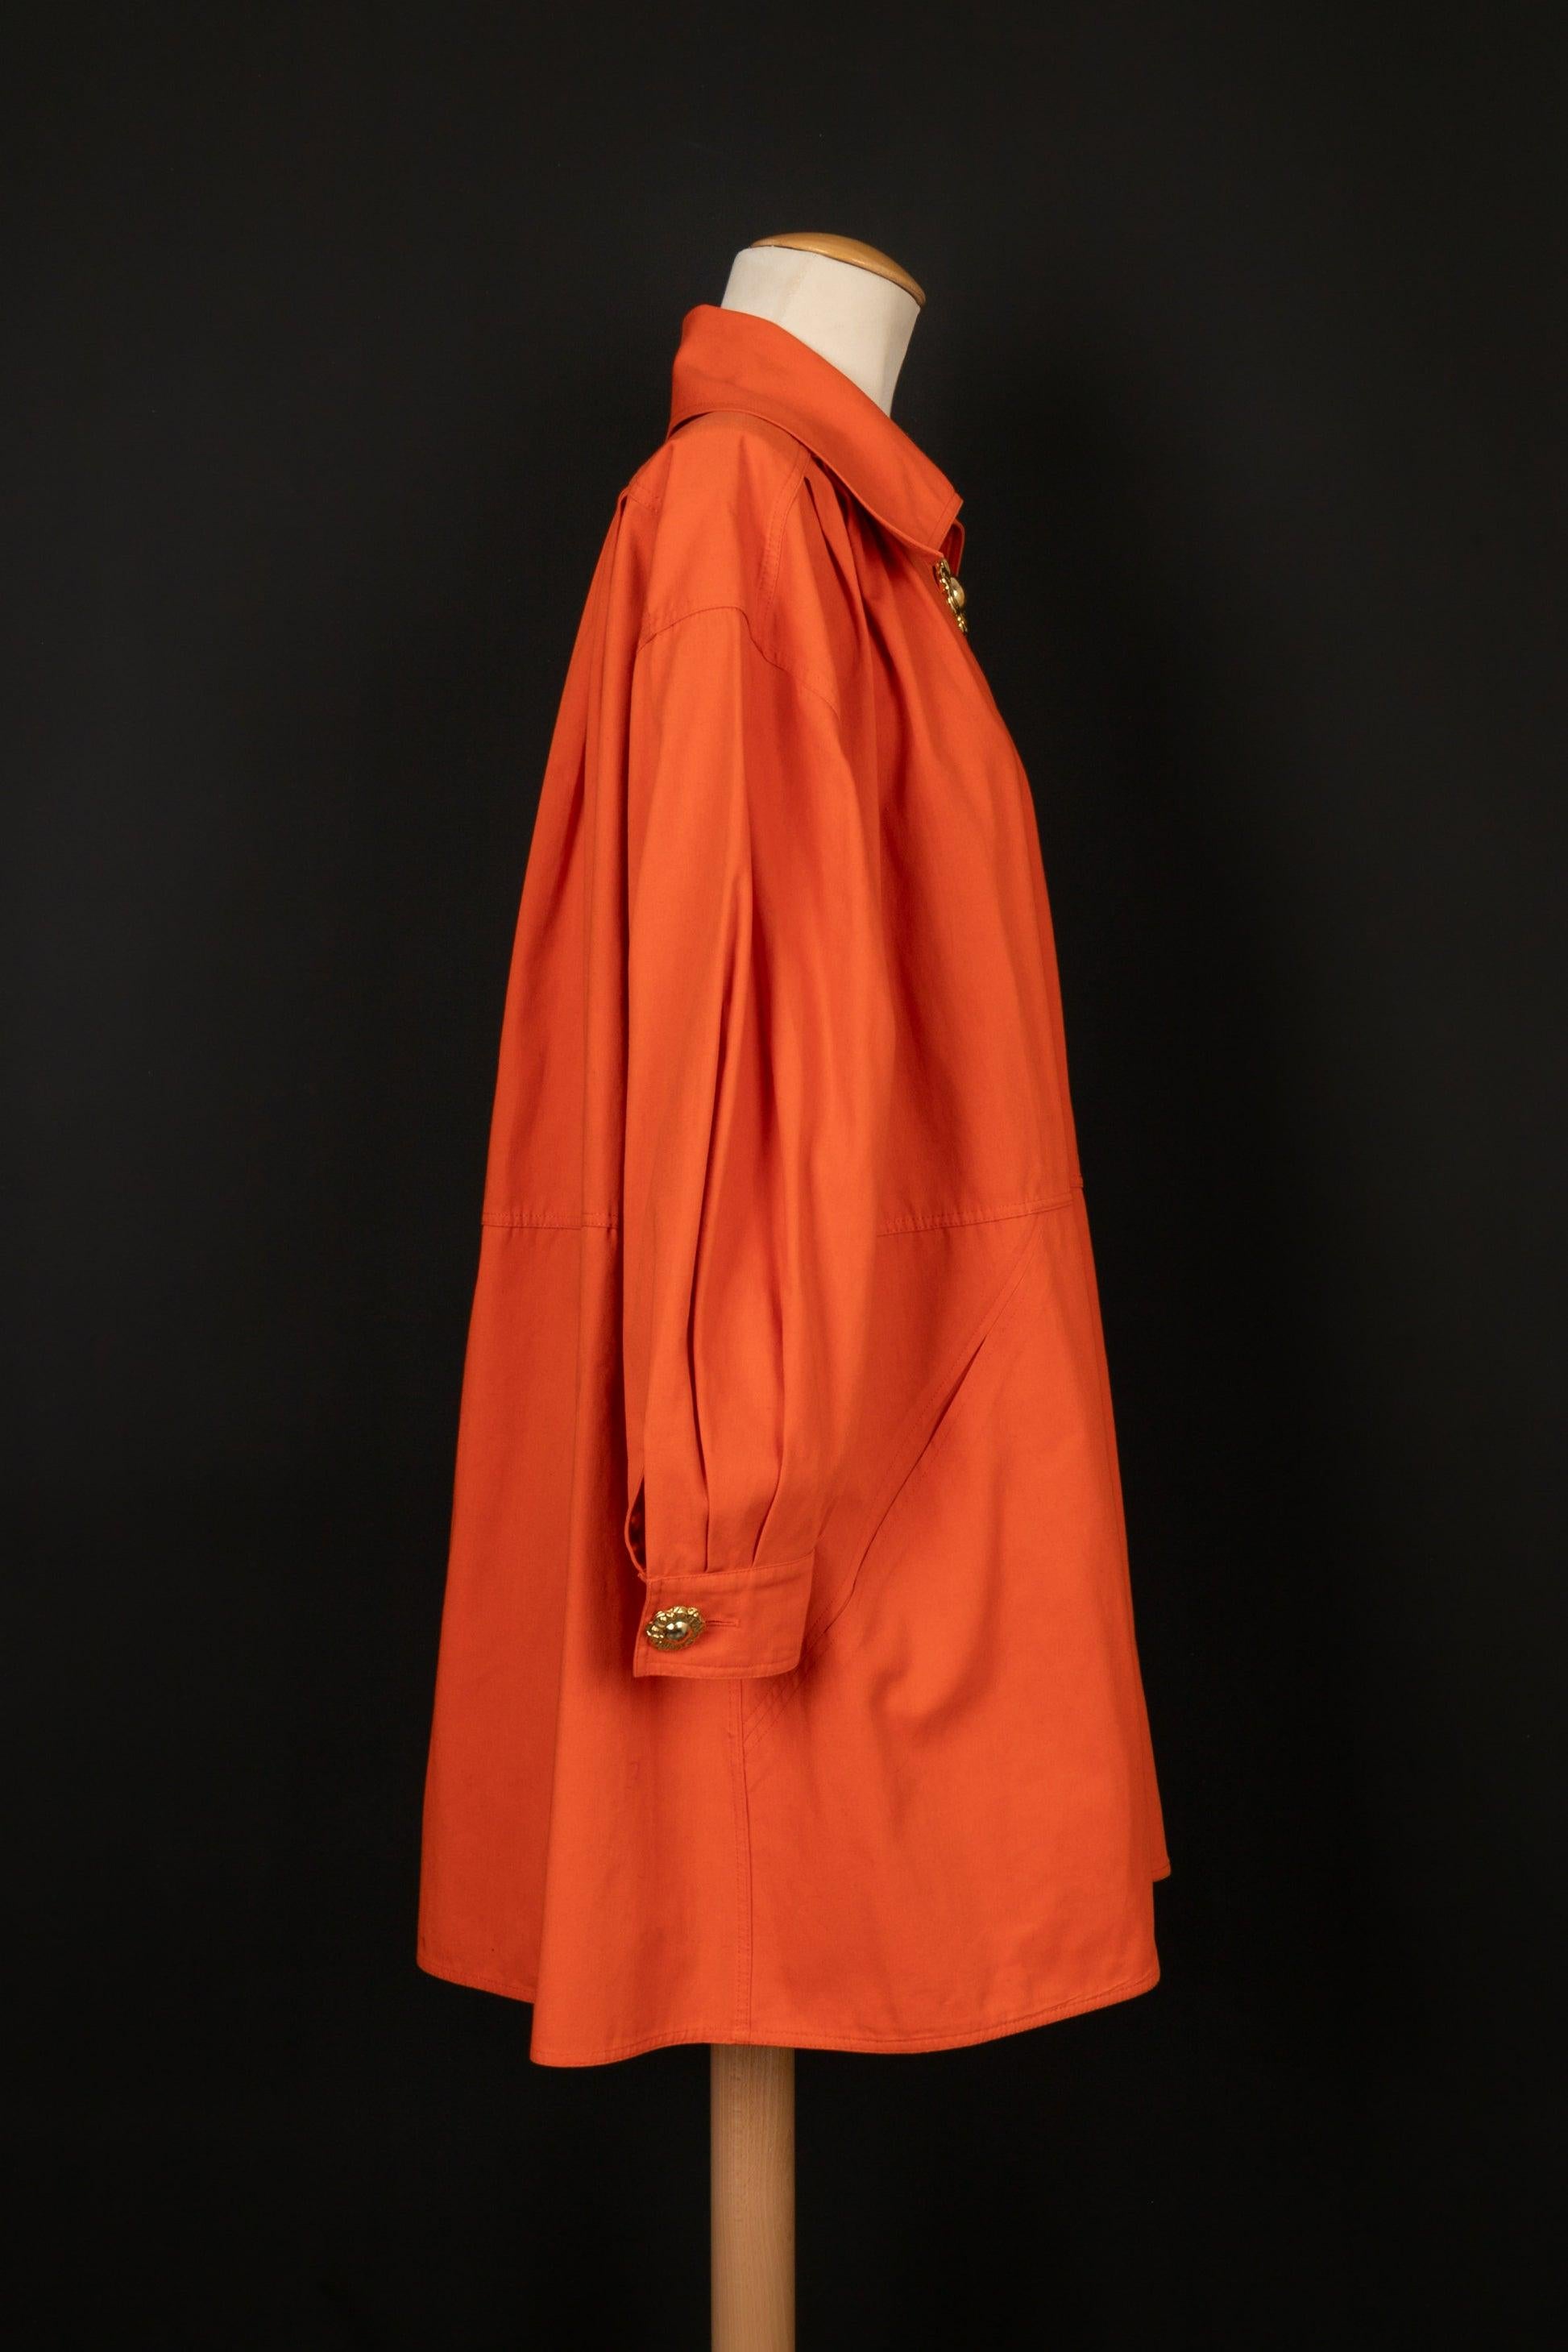 Christian Lacroix - (Made in Italy) Orange cotton coat ornamented with golden metal buttons. Indicated size 40FR.

Additional information:
Condition: Very good condition
Dimensions: Shoulder width: 56 cm - Chest: 69 cm - Sleeve length: 51 cm -